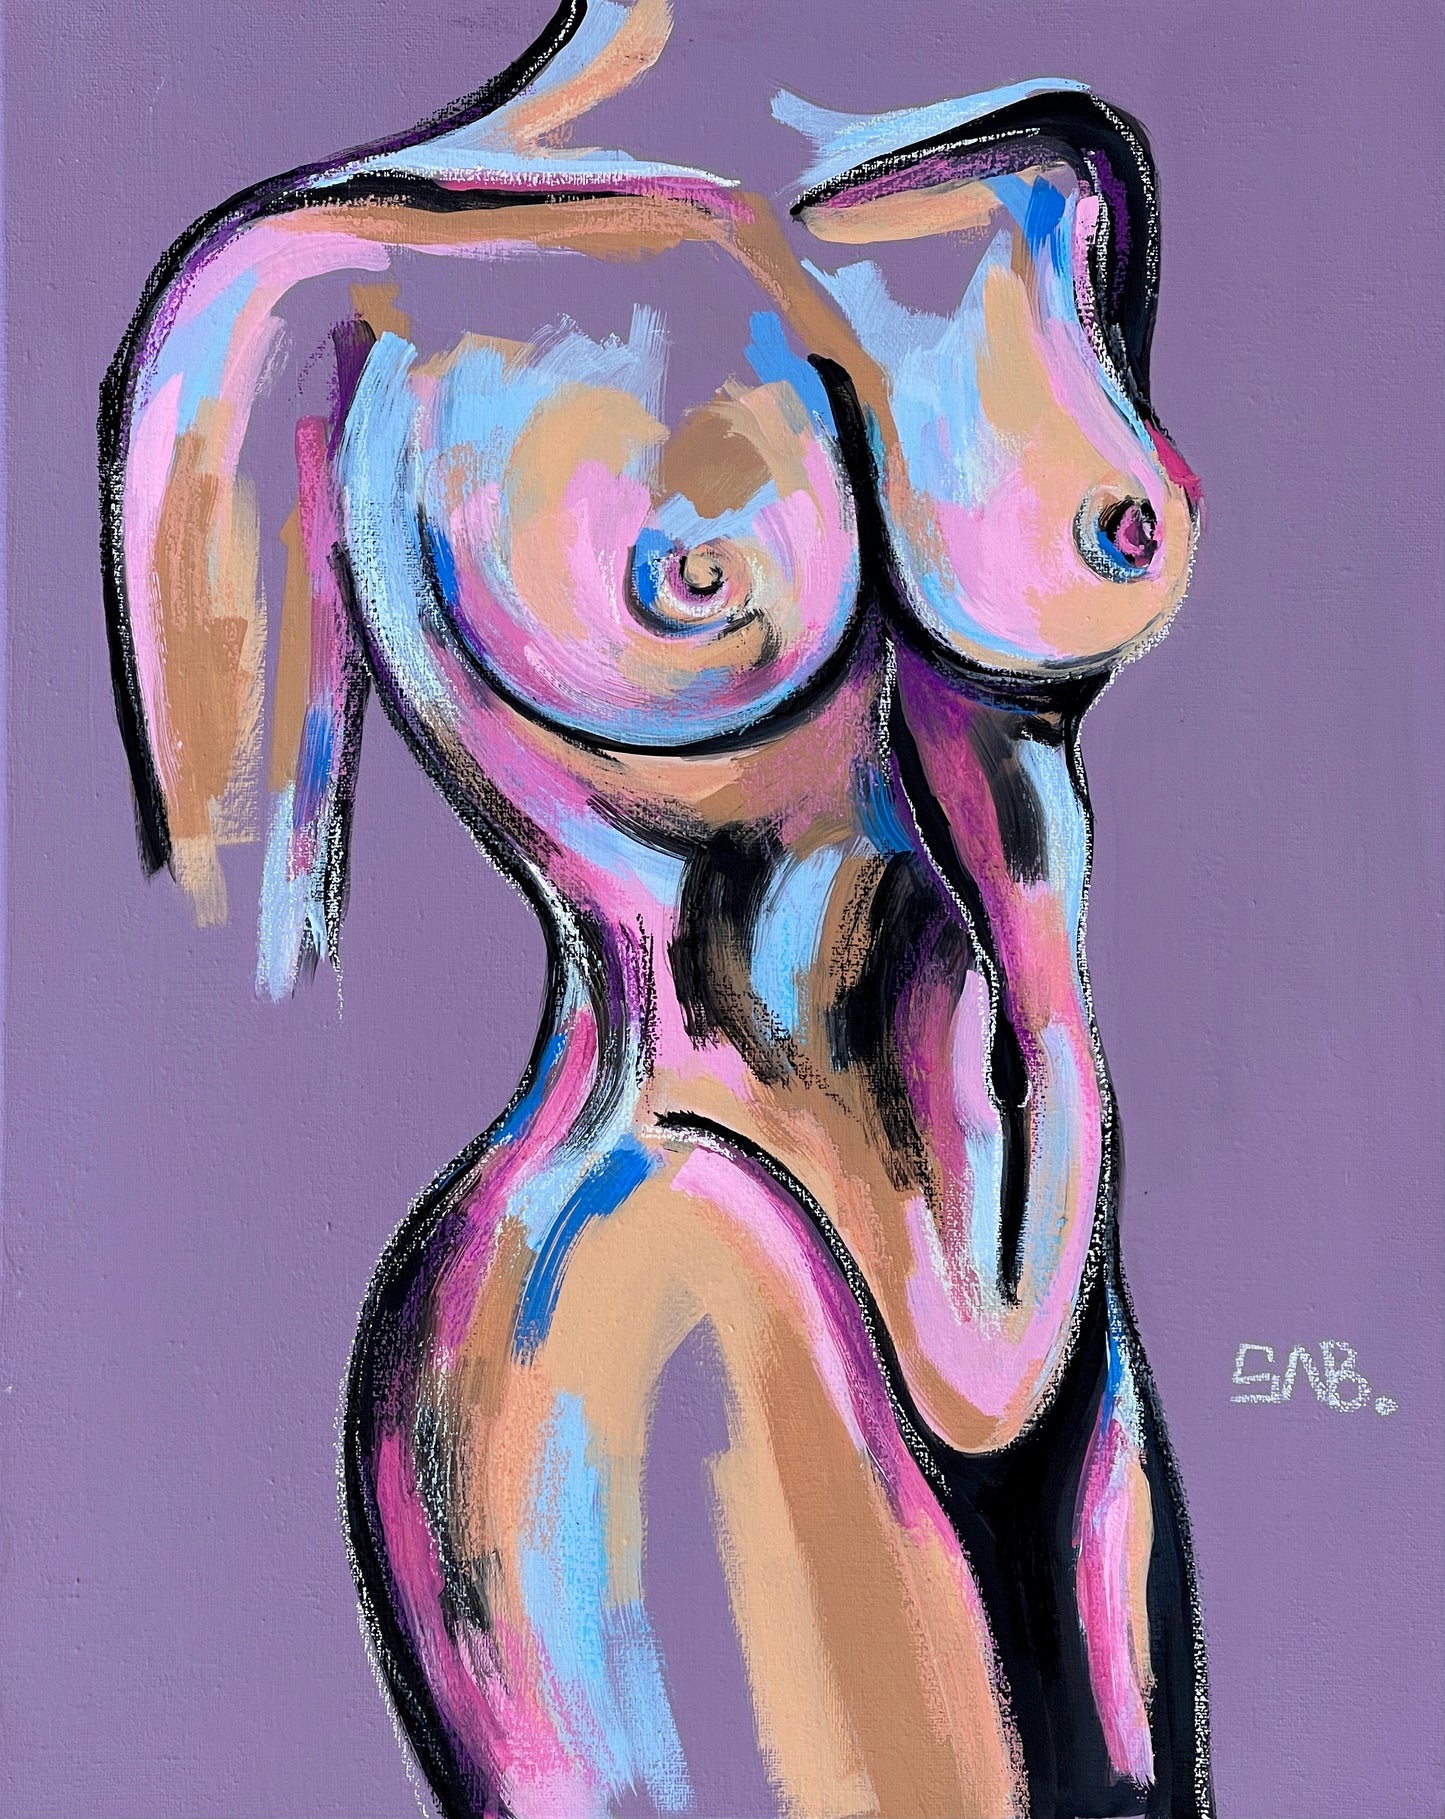 “W” abstract figurative female body painting print